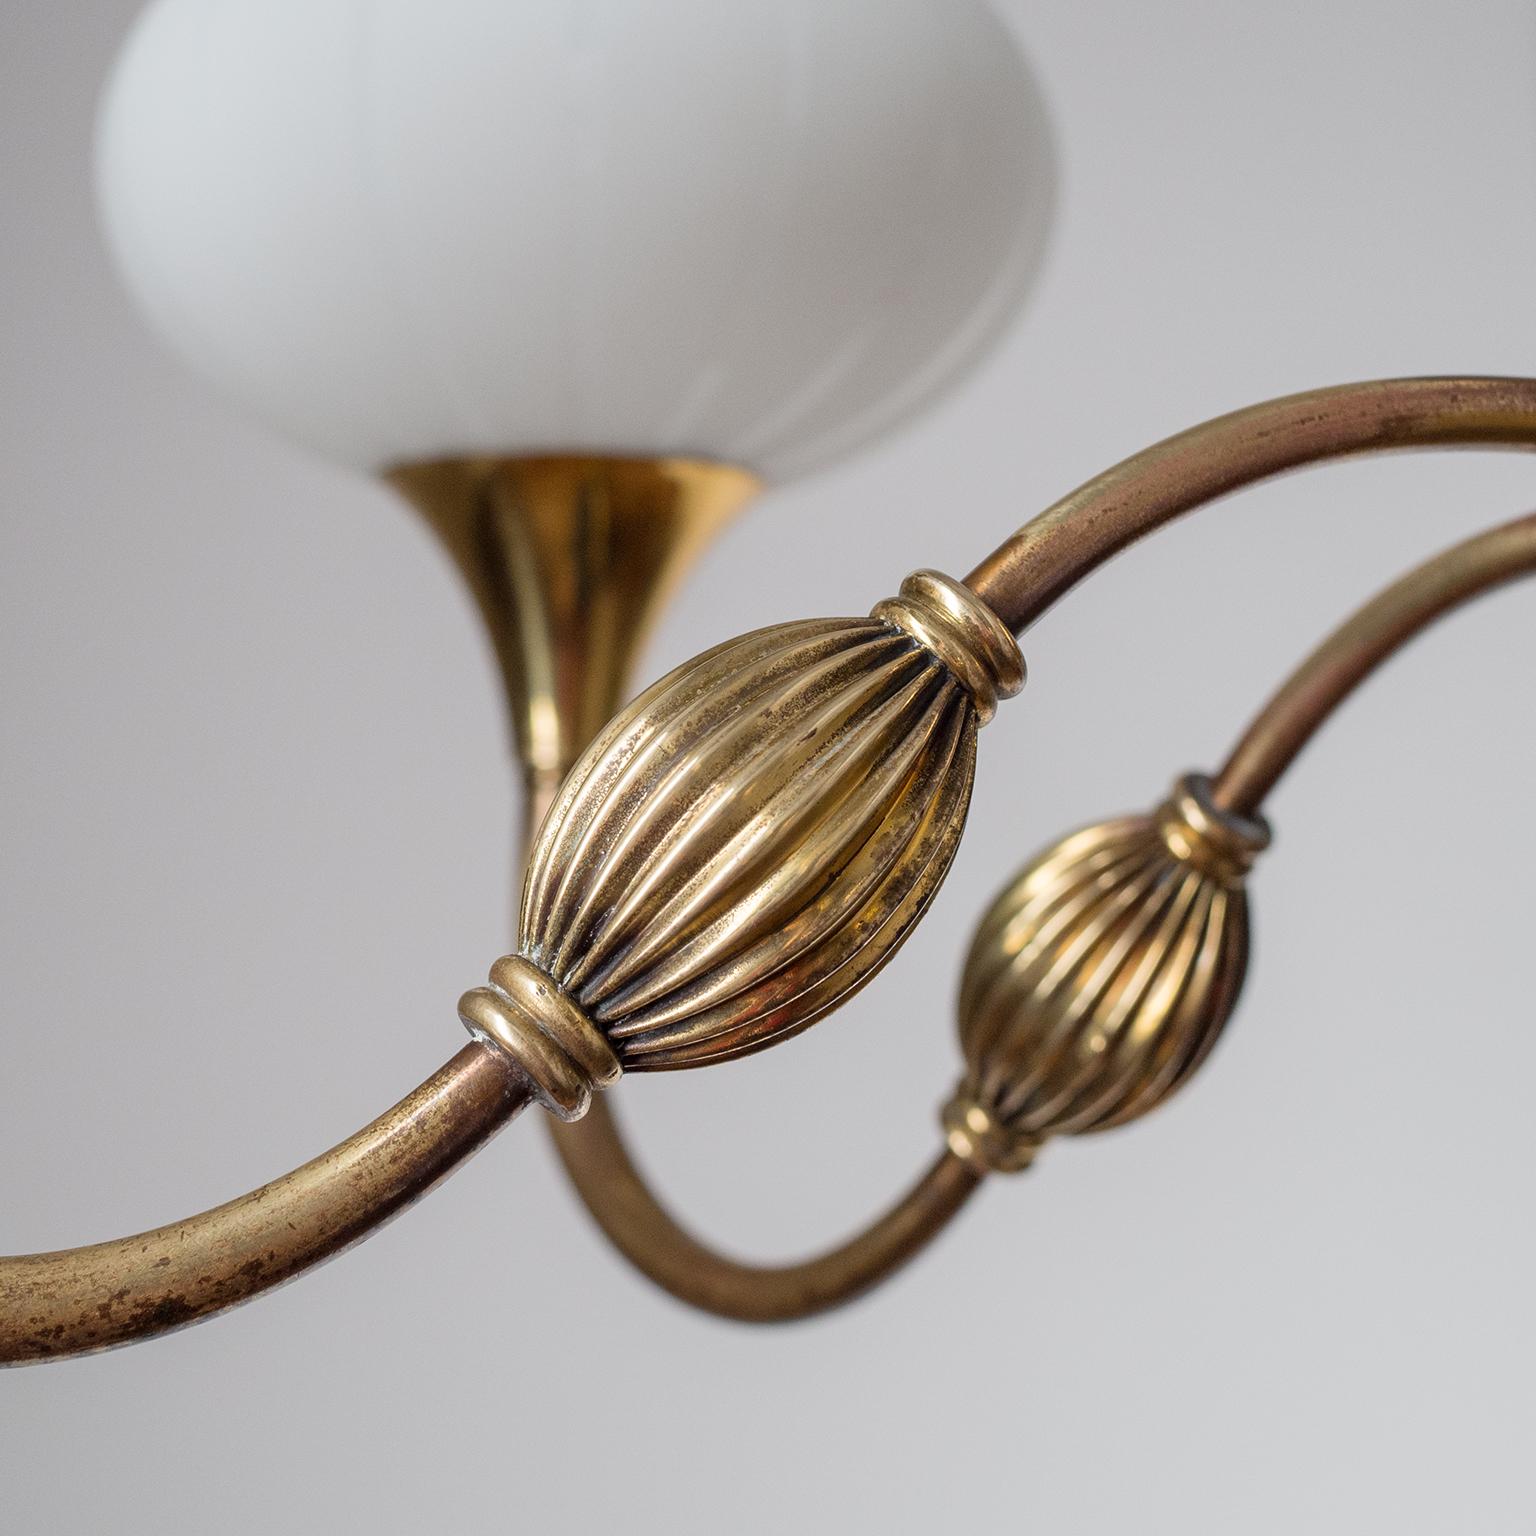 Mid-20th Century Italian Chandelier, 1940s, Striped Glass and Brass